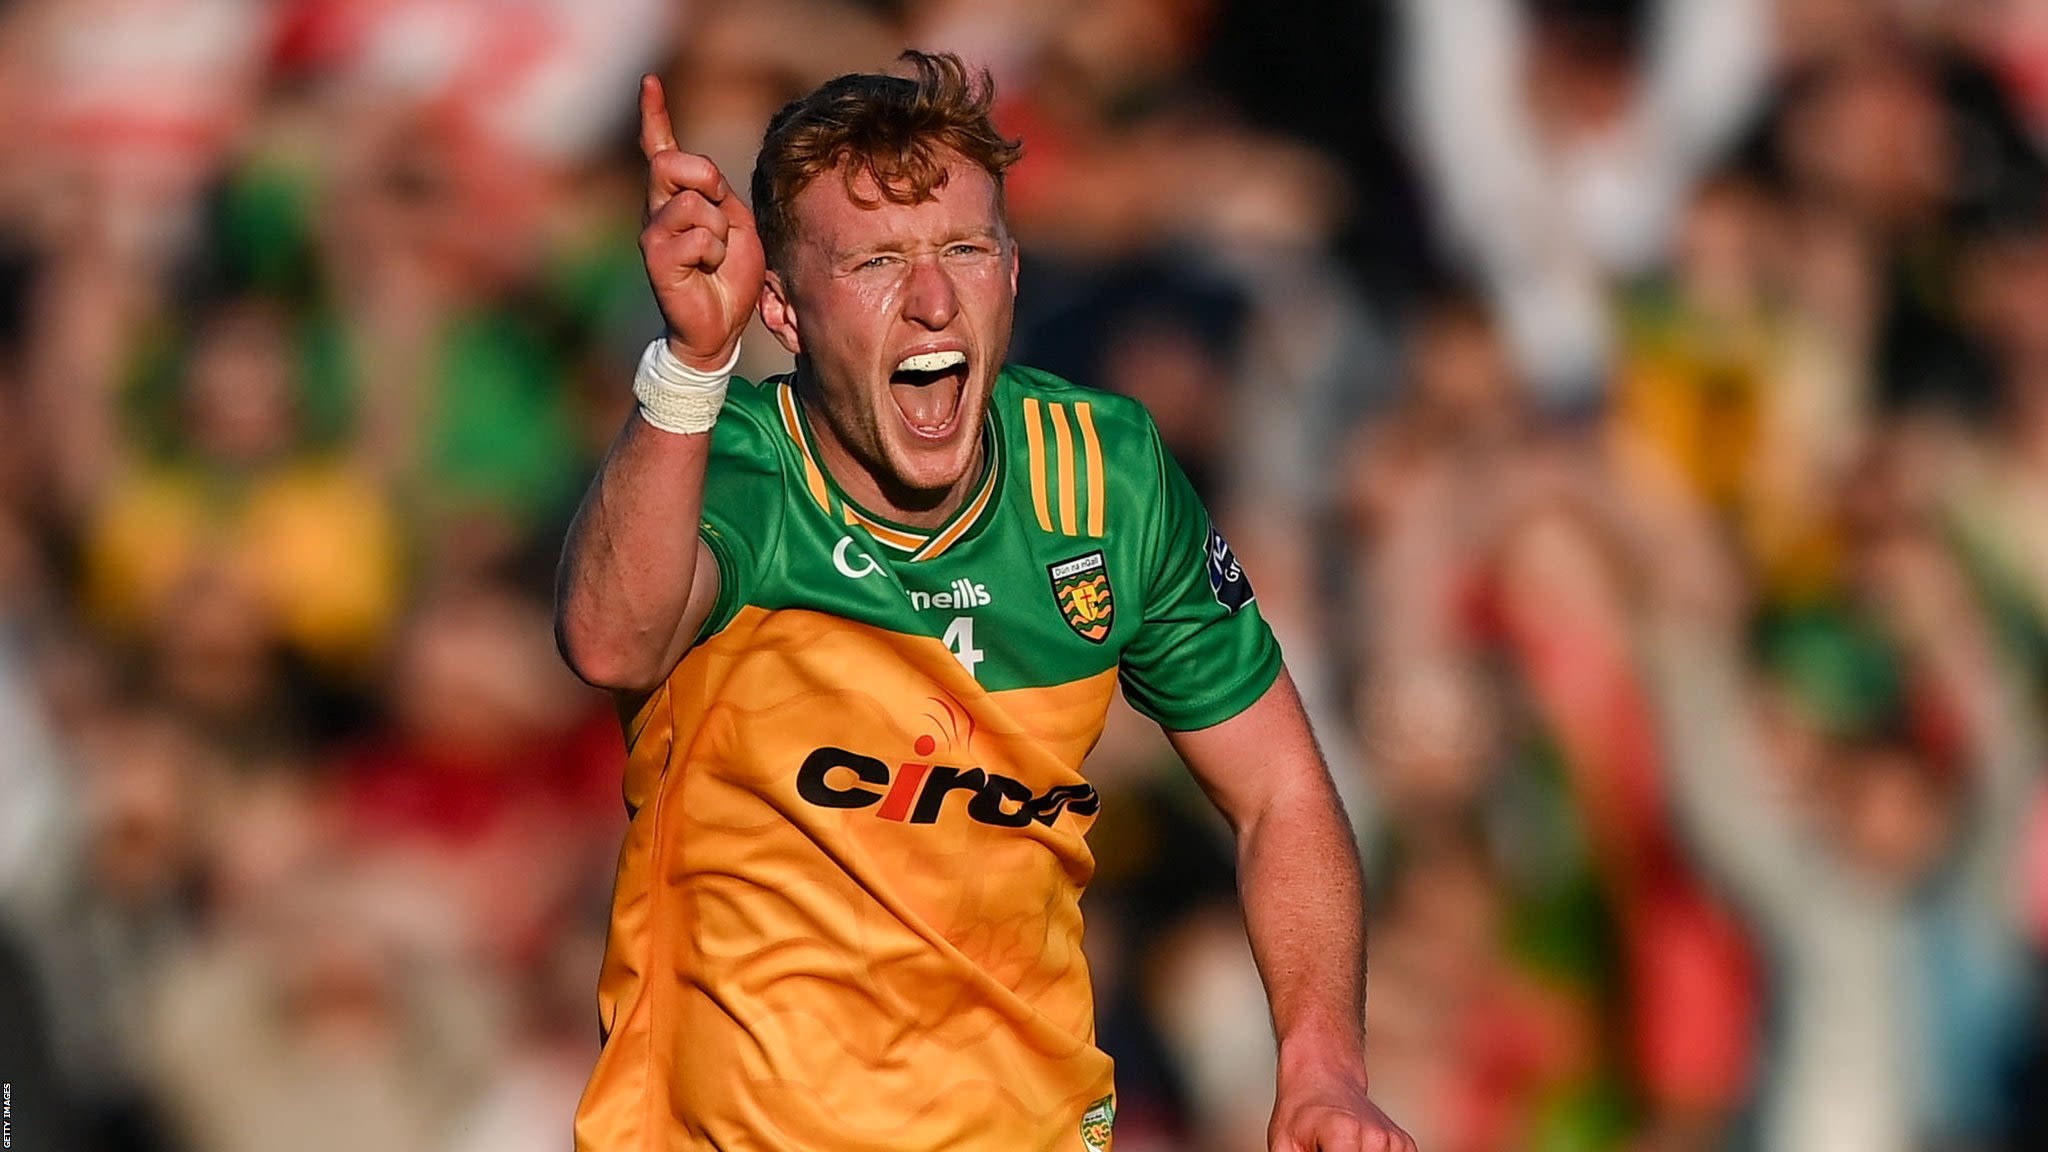 Ulster SFC: Donegal hit four goals to stun champions Derry